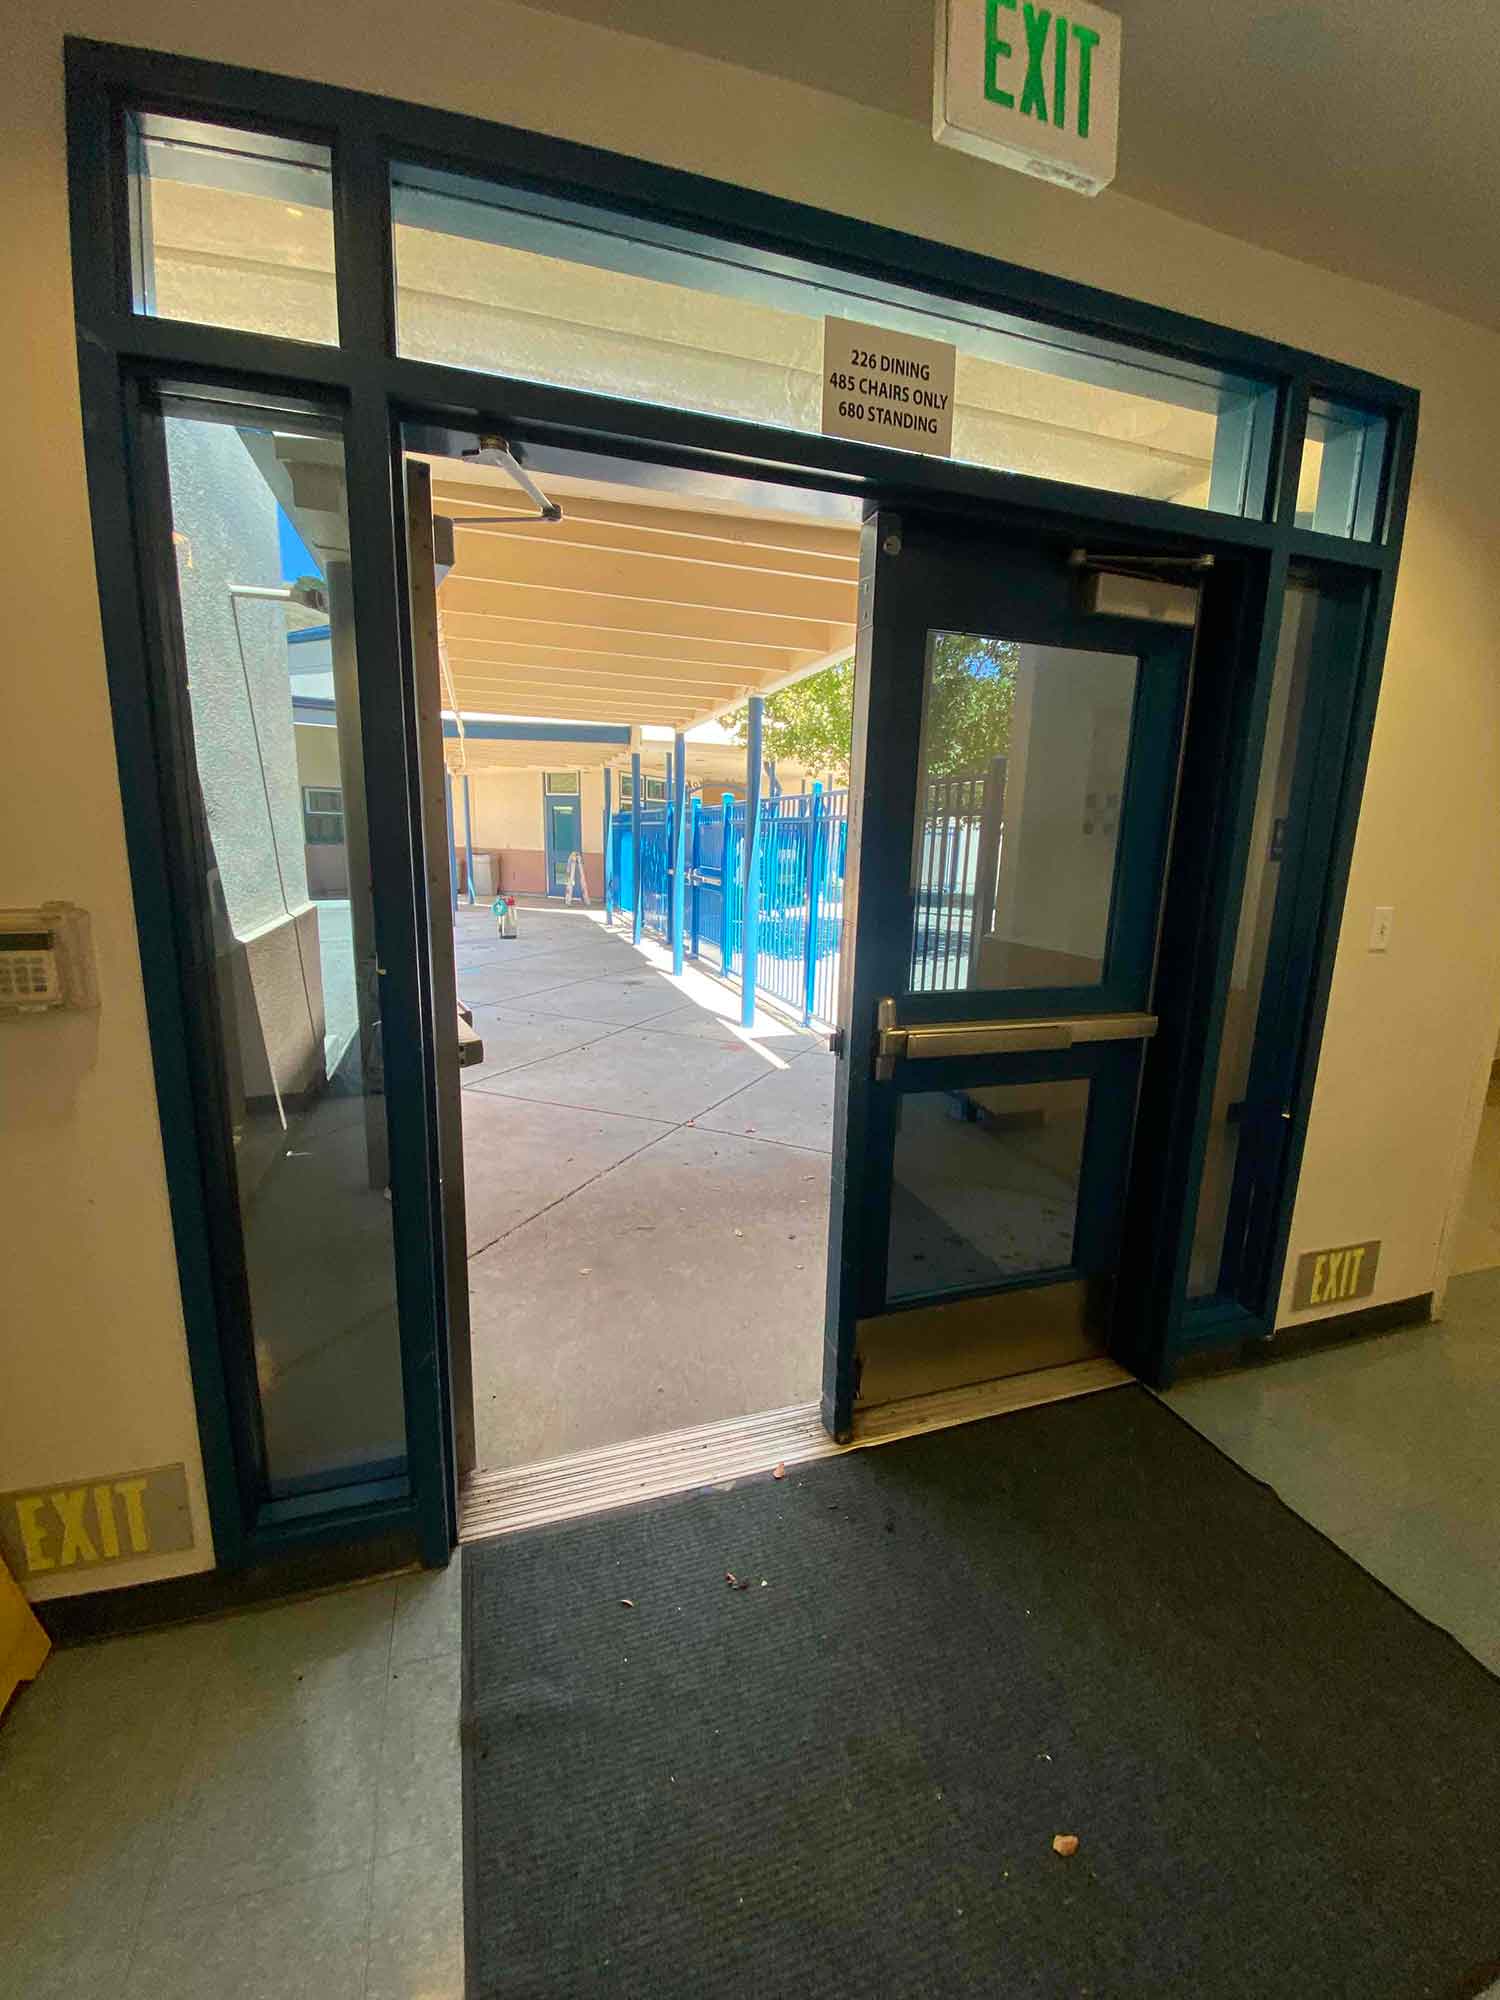 10_San_Rafael_SchooClimatePro installed 3M Affinity Window Film at this elementary school in San Rafael, CA. Are there benefits of having window film installed in schools?l_Window_Film_ClimatePro